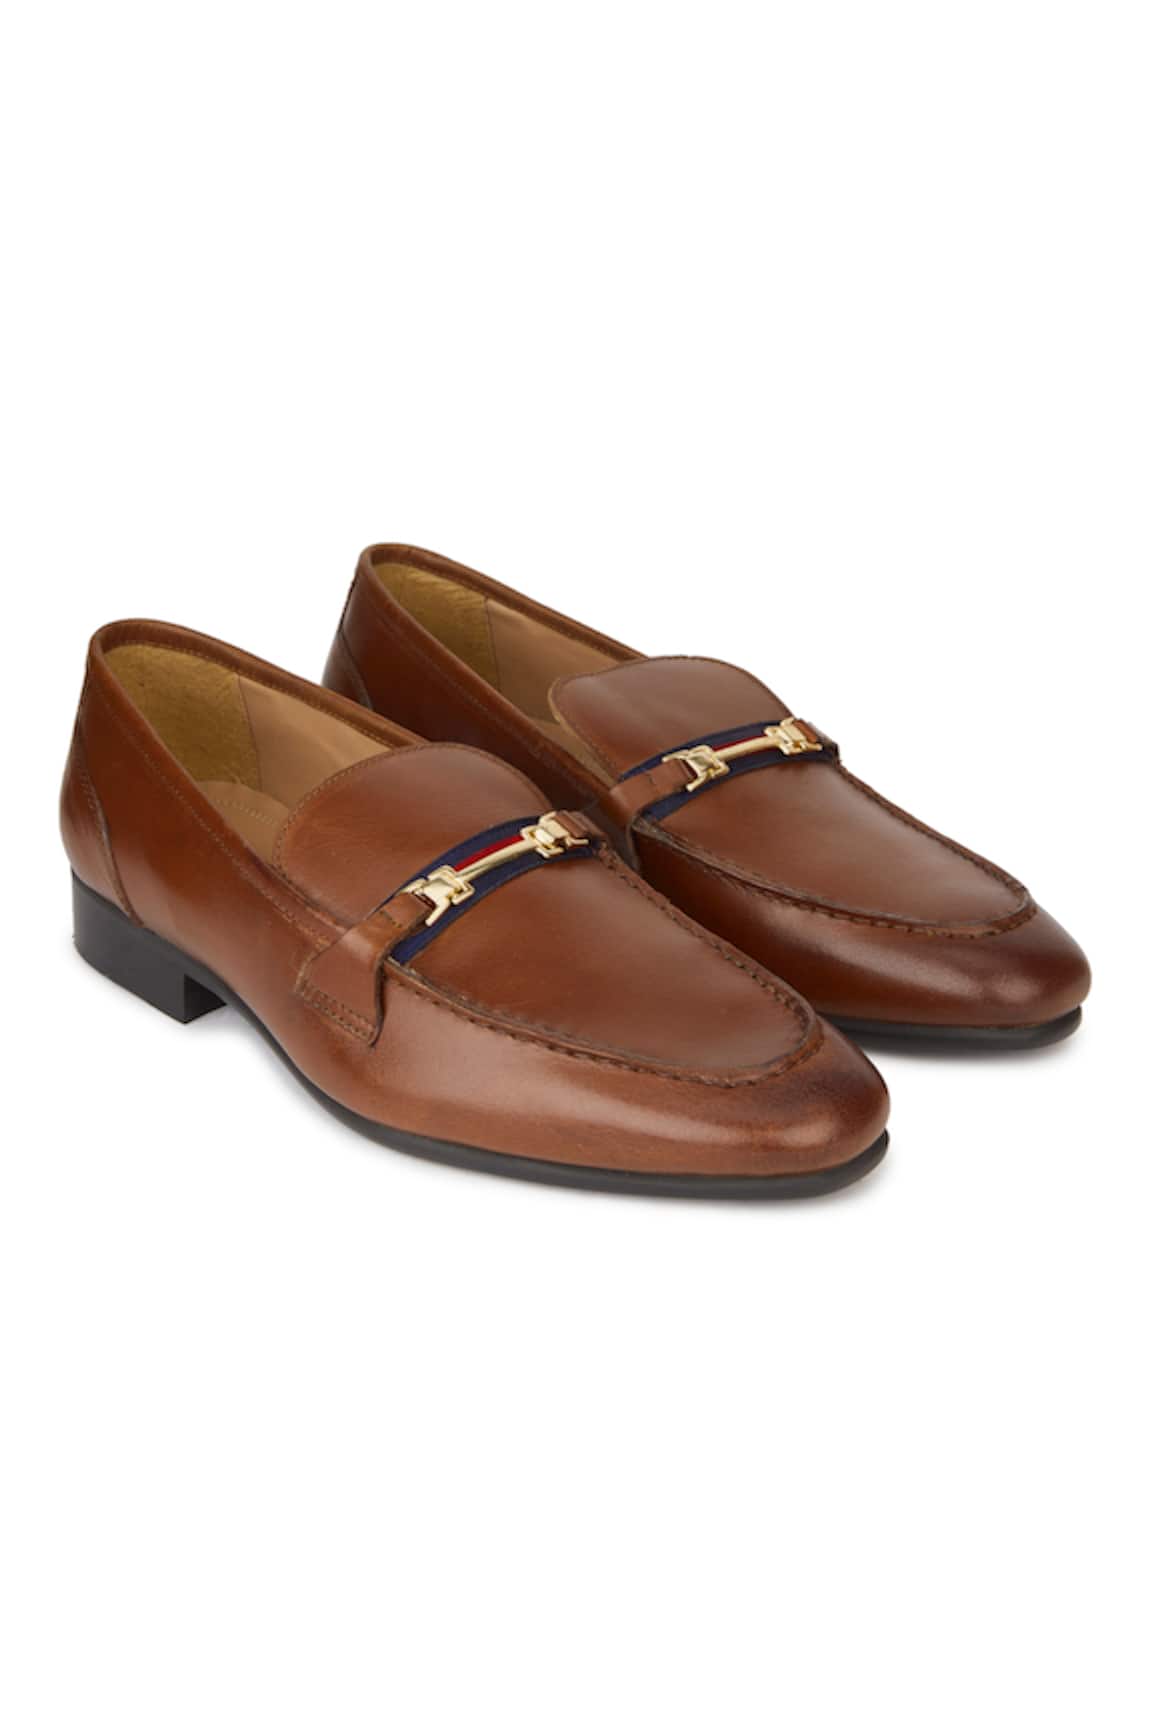 Hats Off Accessories Genuine Leather Slip On Buckle Loafers